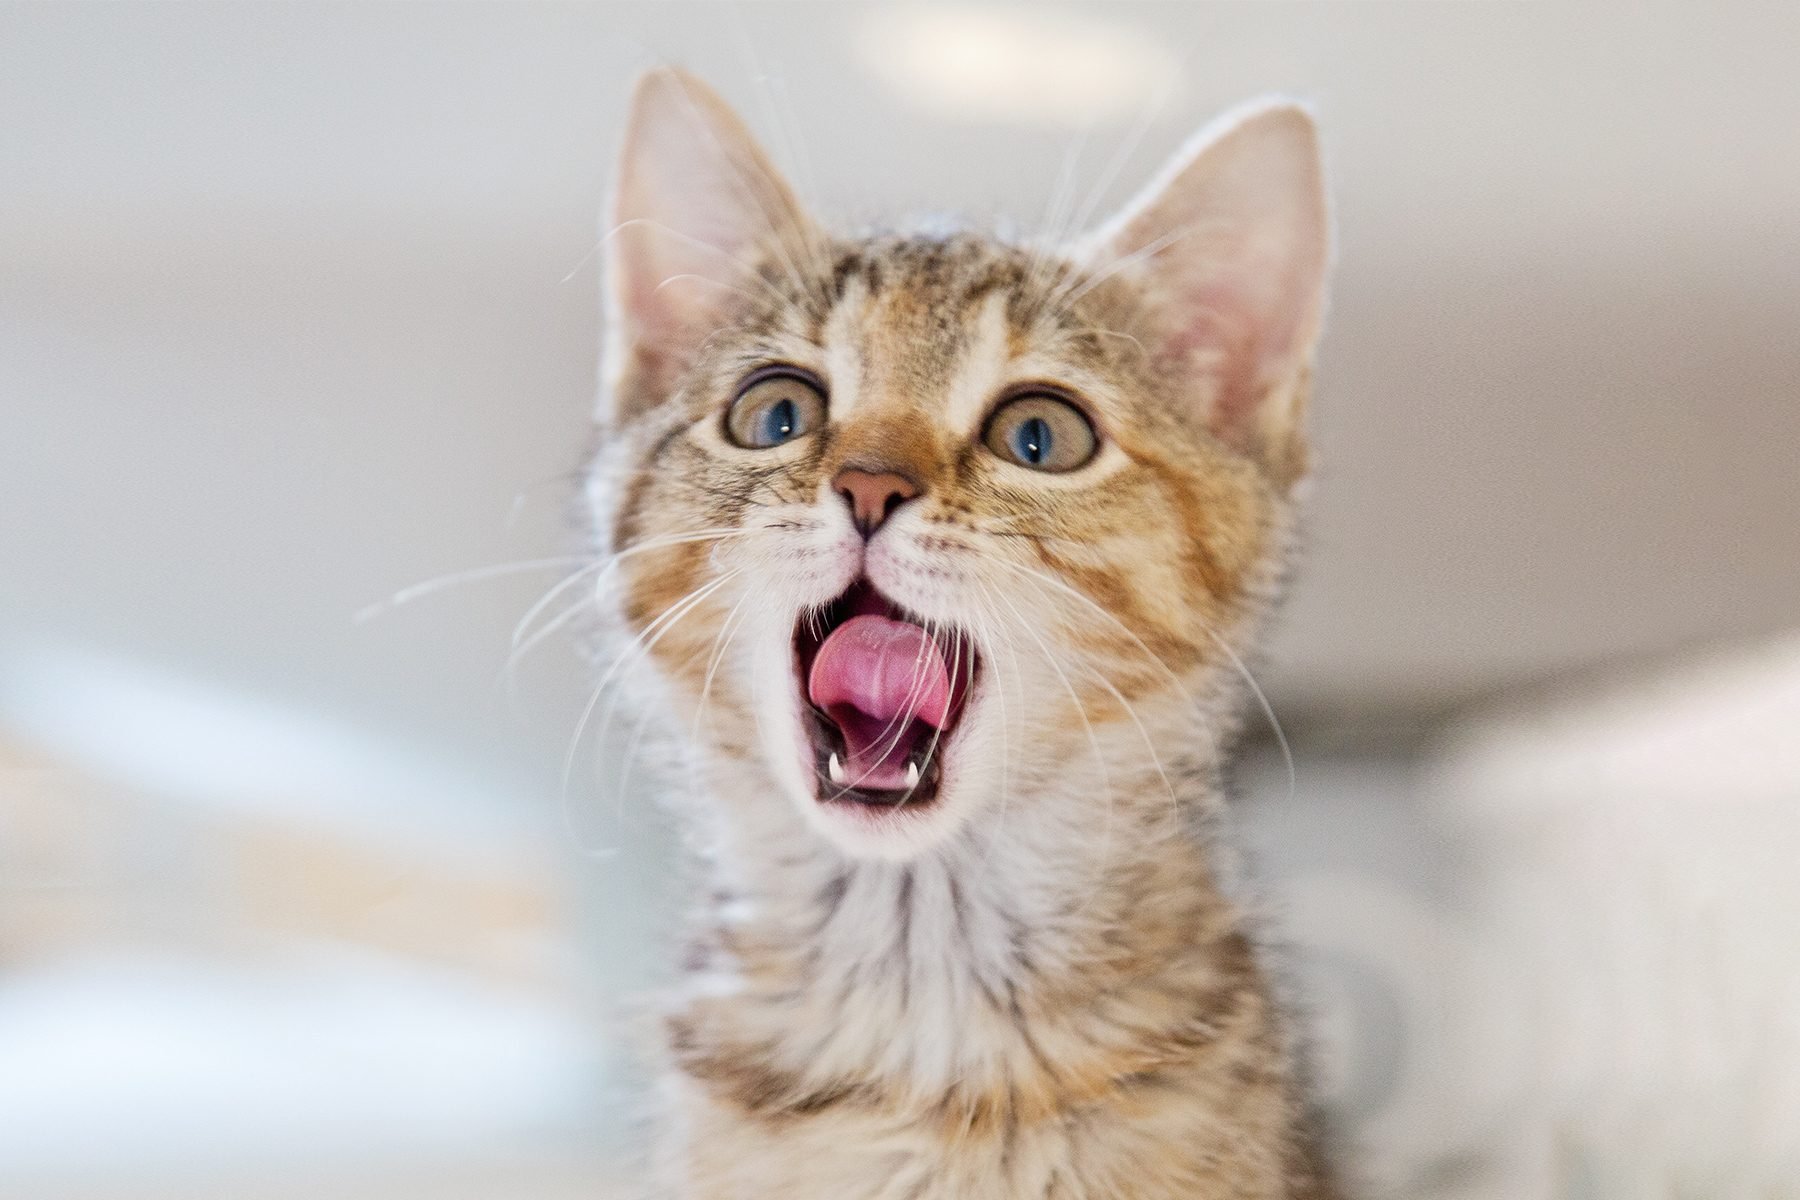 50 Photos Of Cute Kittens That Will Make You Melt Gettyimages 512271329